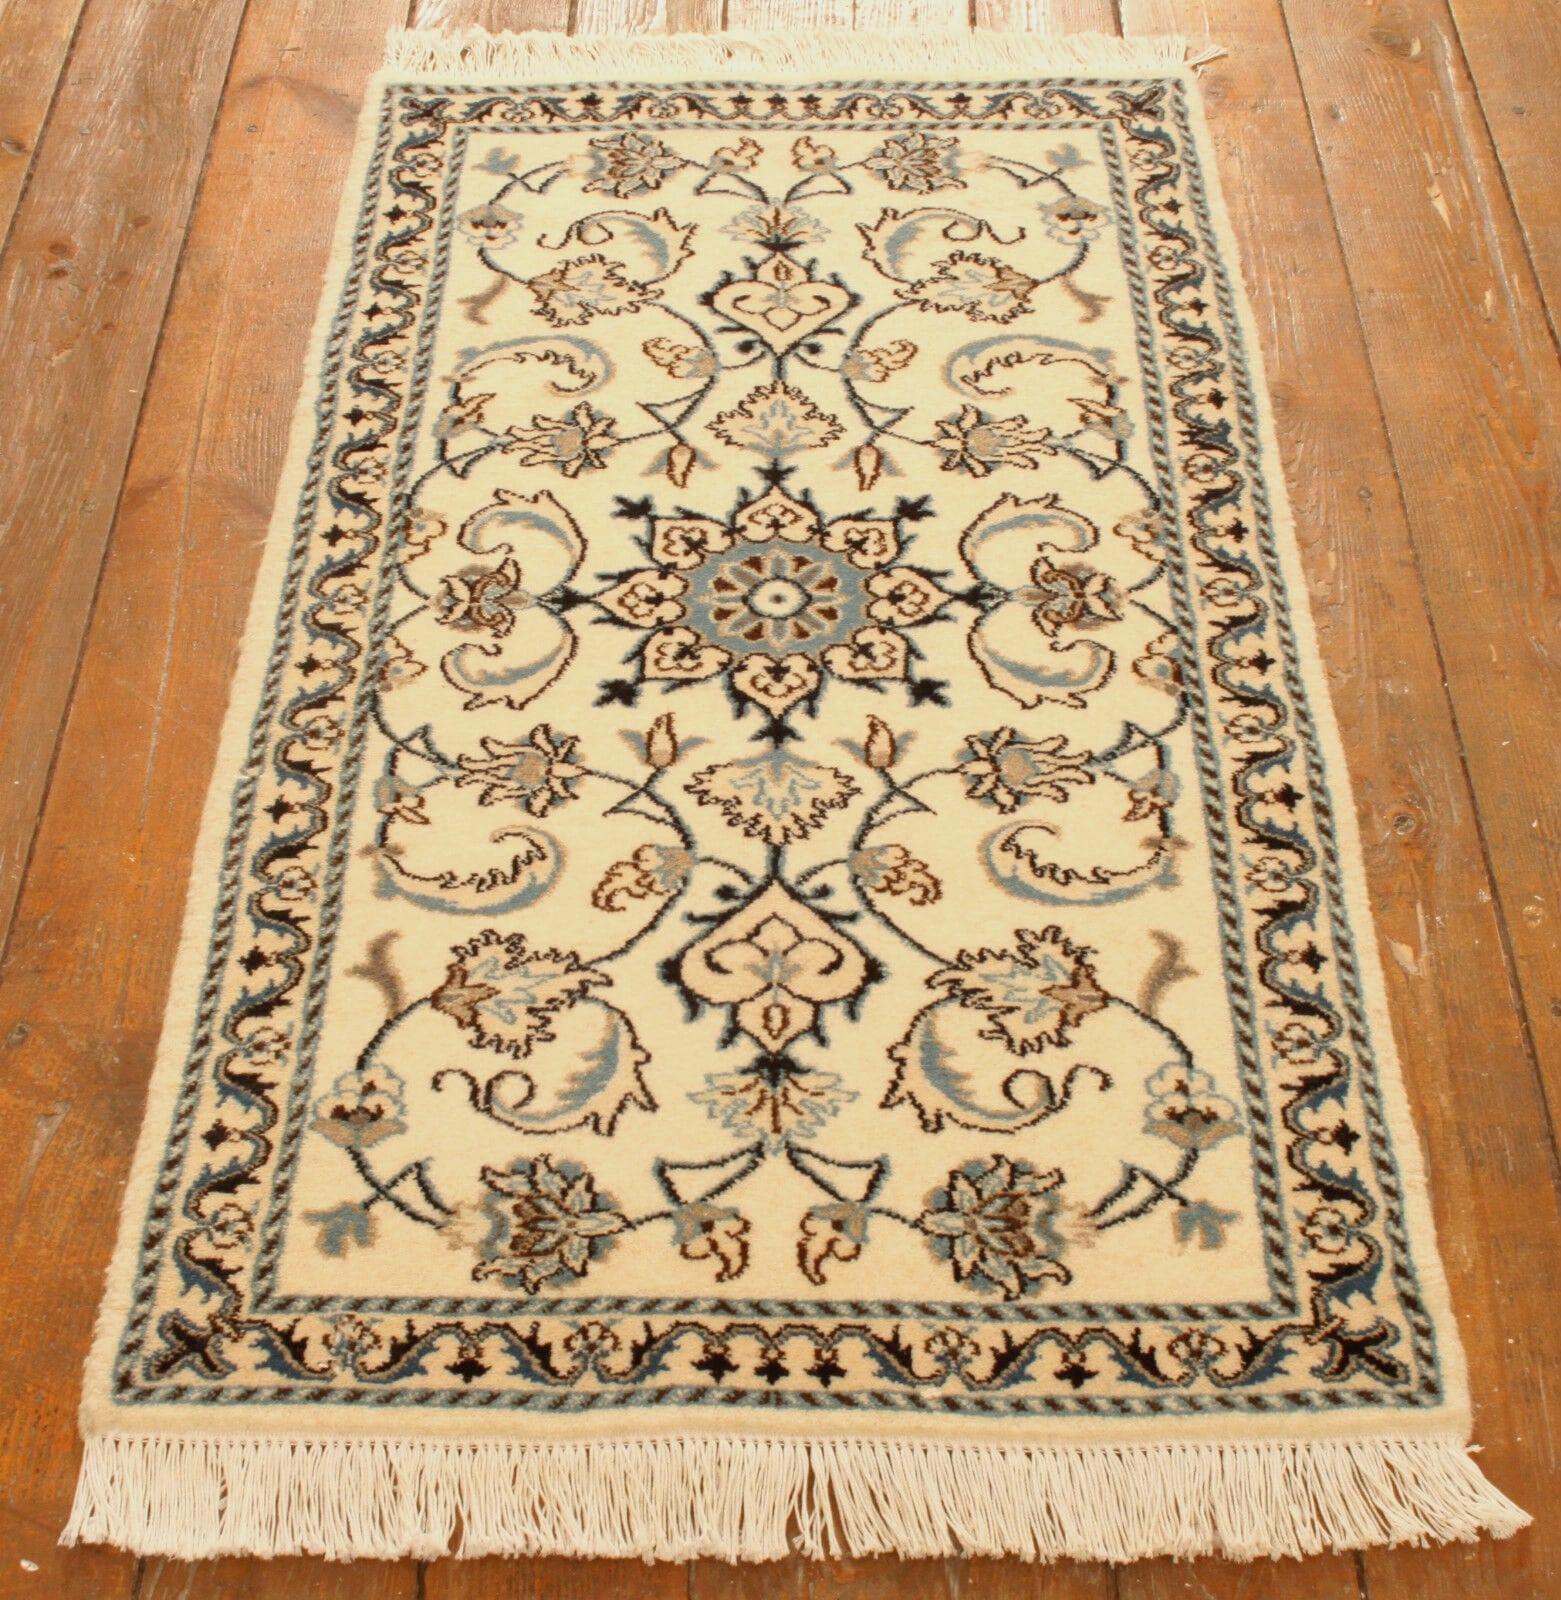 Late 20th Century Handmade Vintage Persian Style Nain Rug 2.2' x 4.4', 1990s - 1T16 For Sale